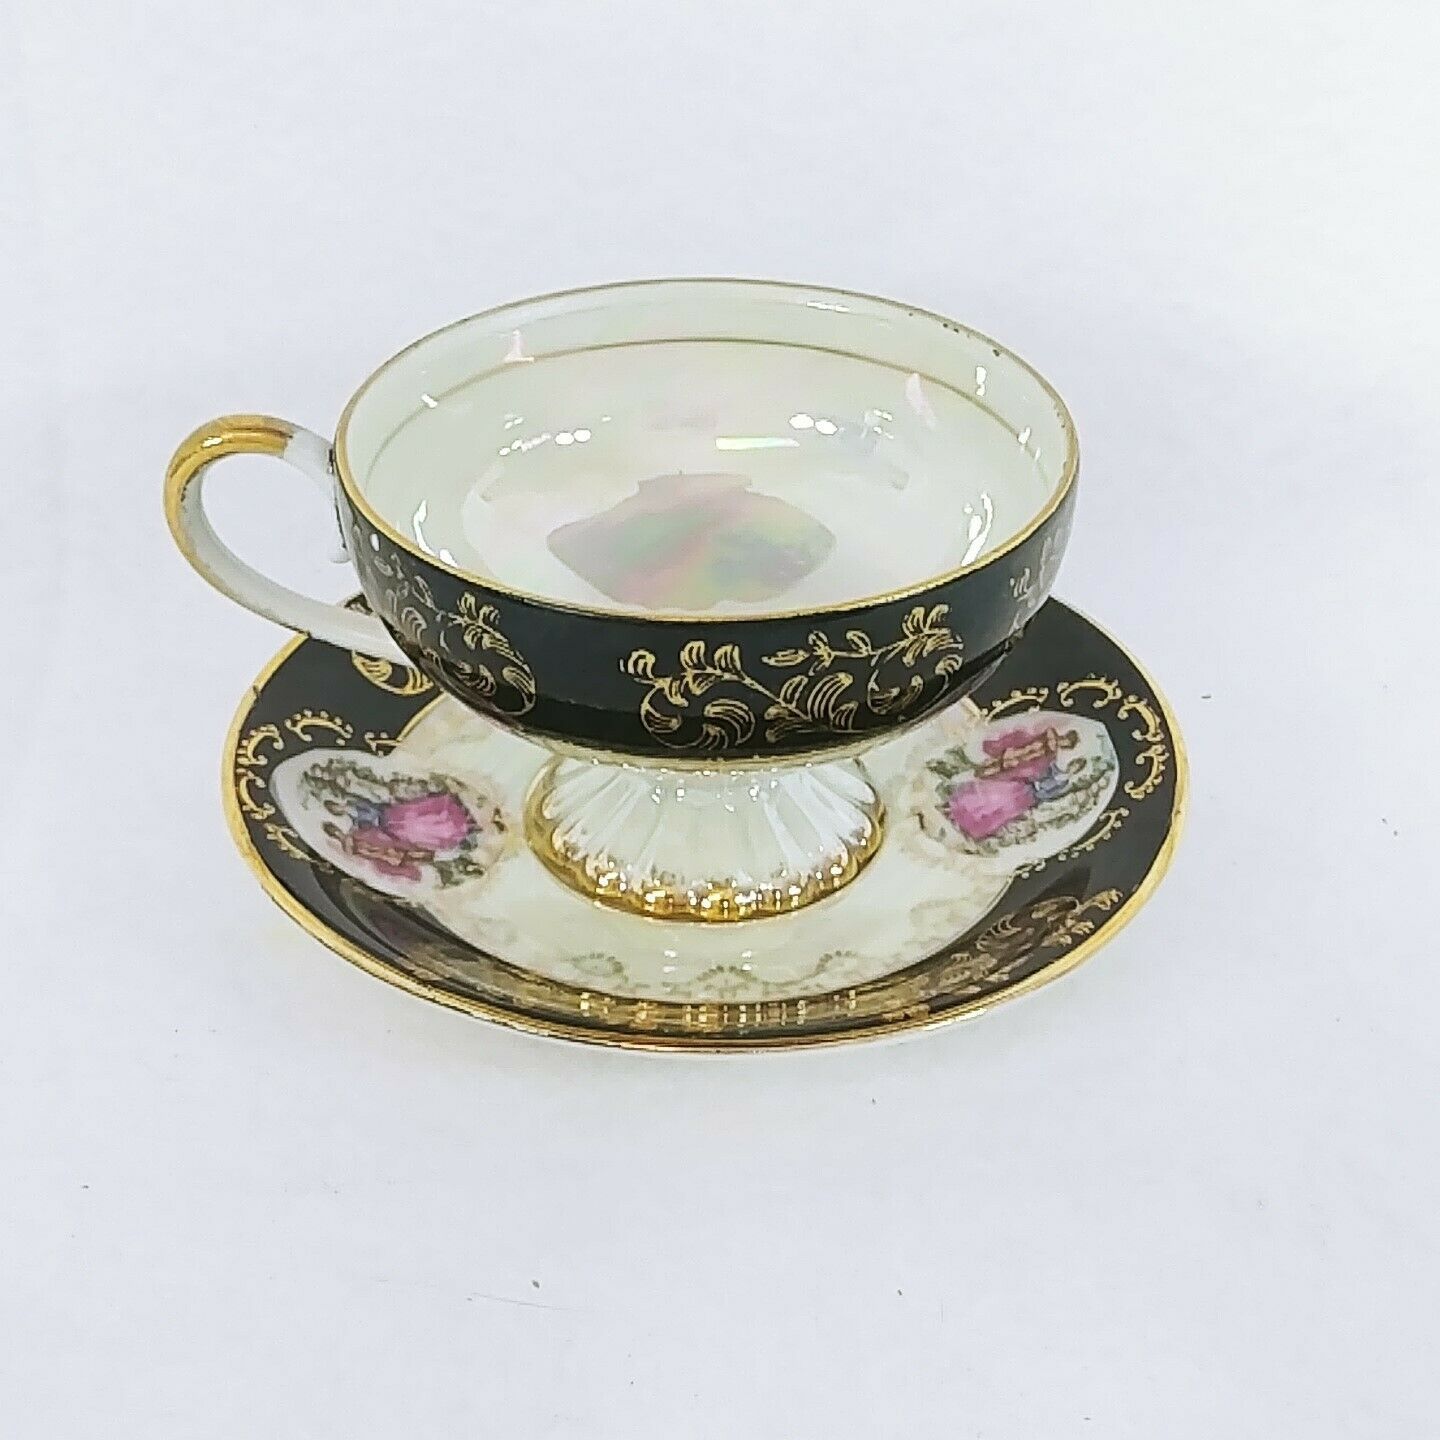 Royal Crown Footed Teacup Saucer Victorian Courting Couple Vintage #2852 - $45.10